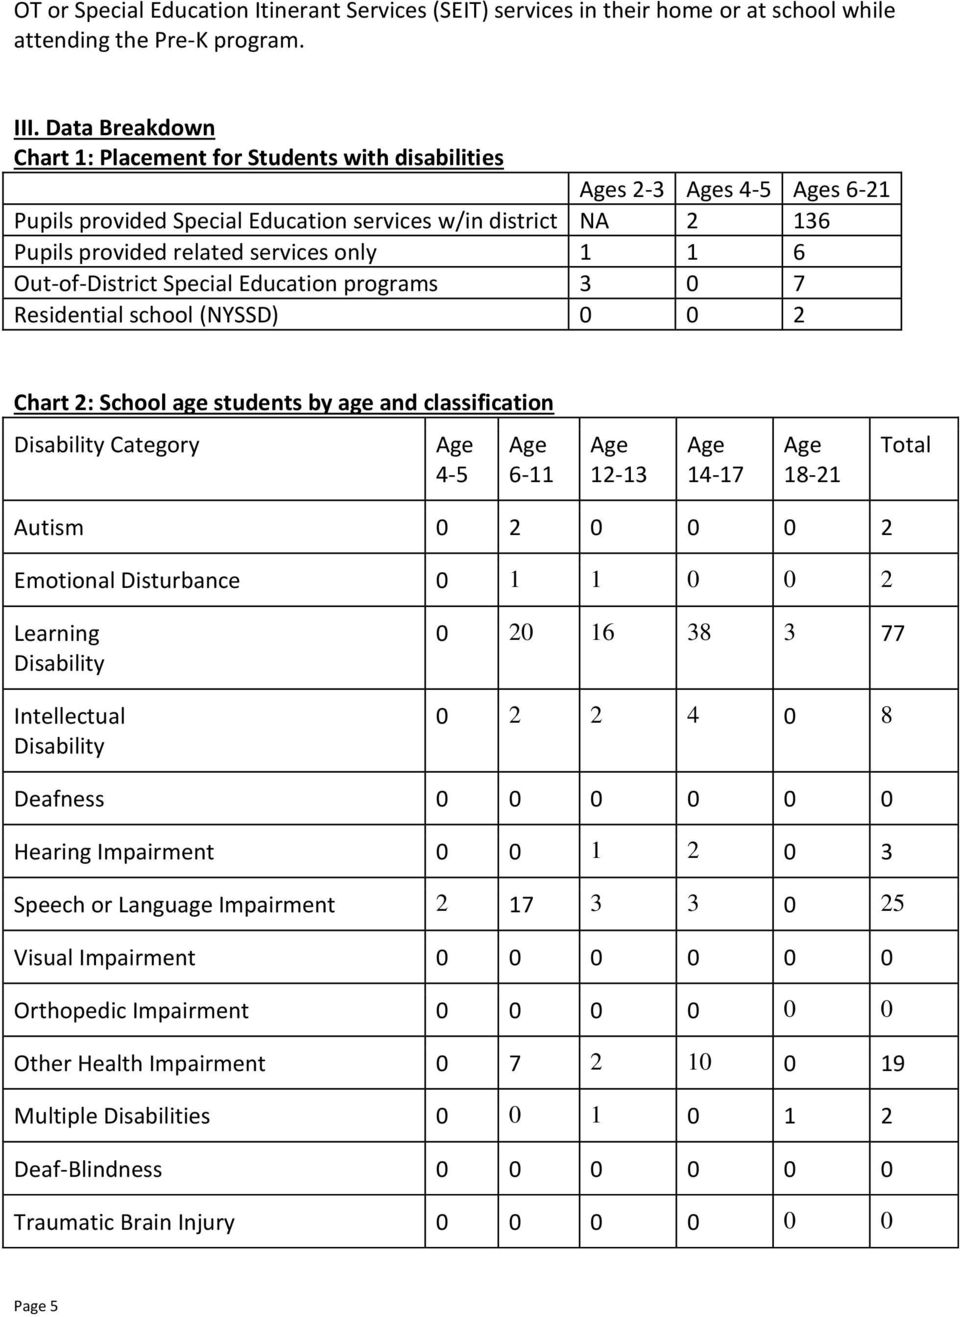 1 6 Out-of-District Special Education programs 3 0 7 Residential school (NYSSD) 0 0 2 Chart 2: School age students by age and classification Disability Category Age 4-5 Age 6-11 Age 12-13 Age 14-17